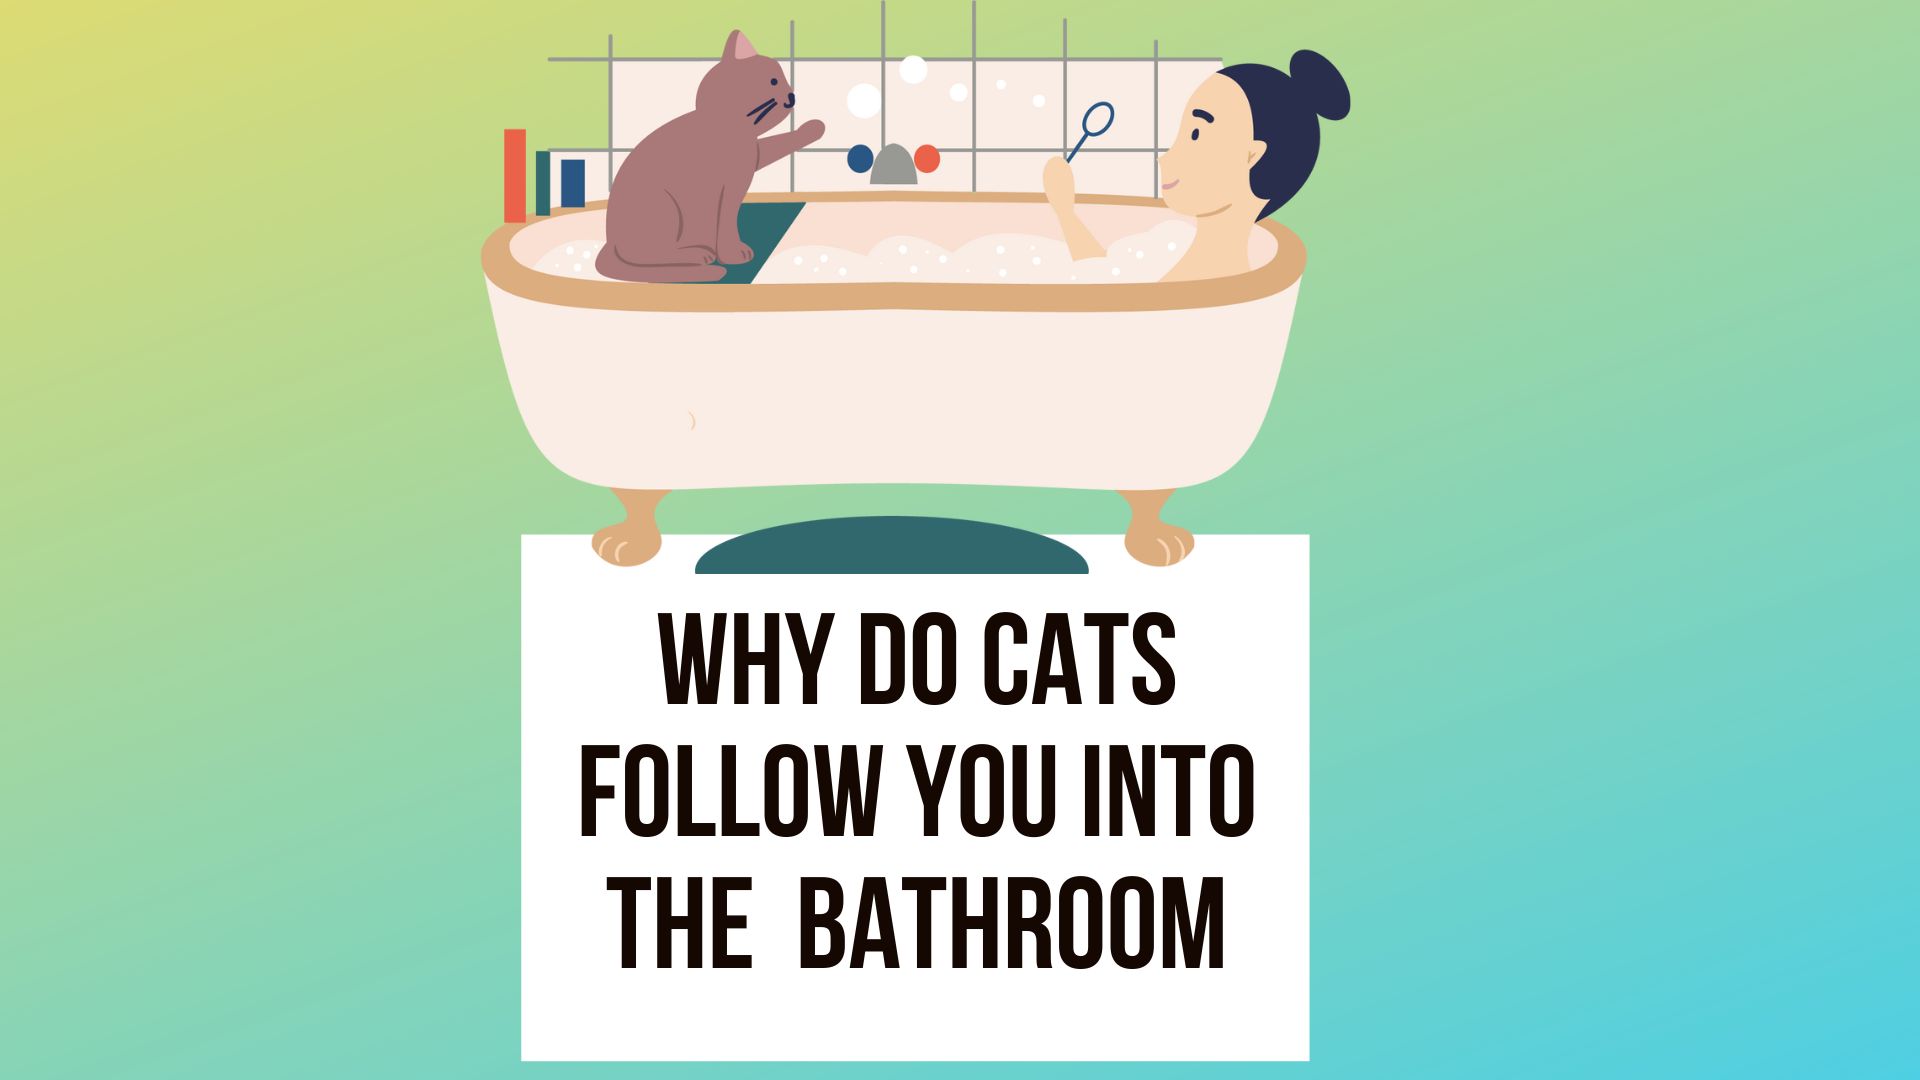 Why Do Cats Follow You into the Bathroom